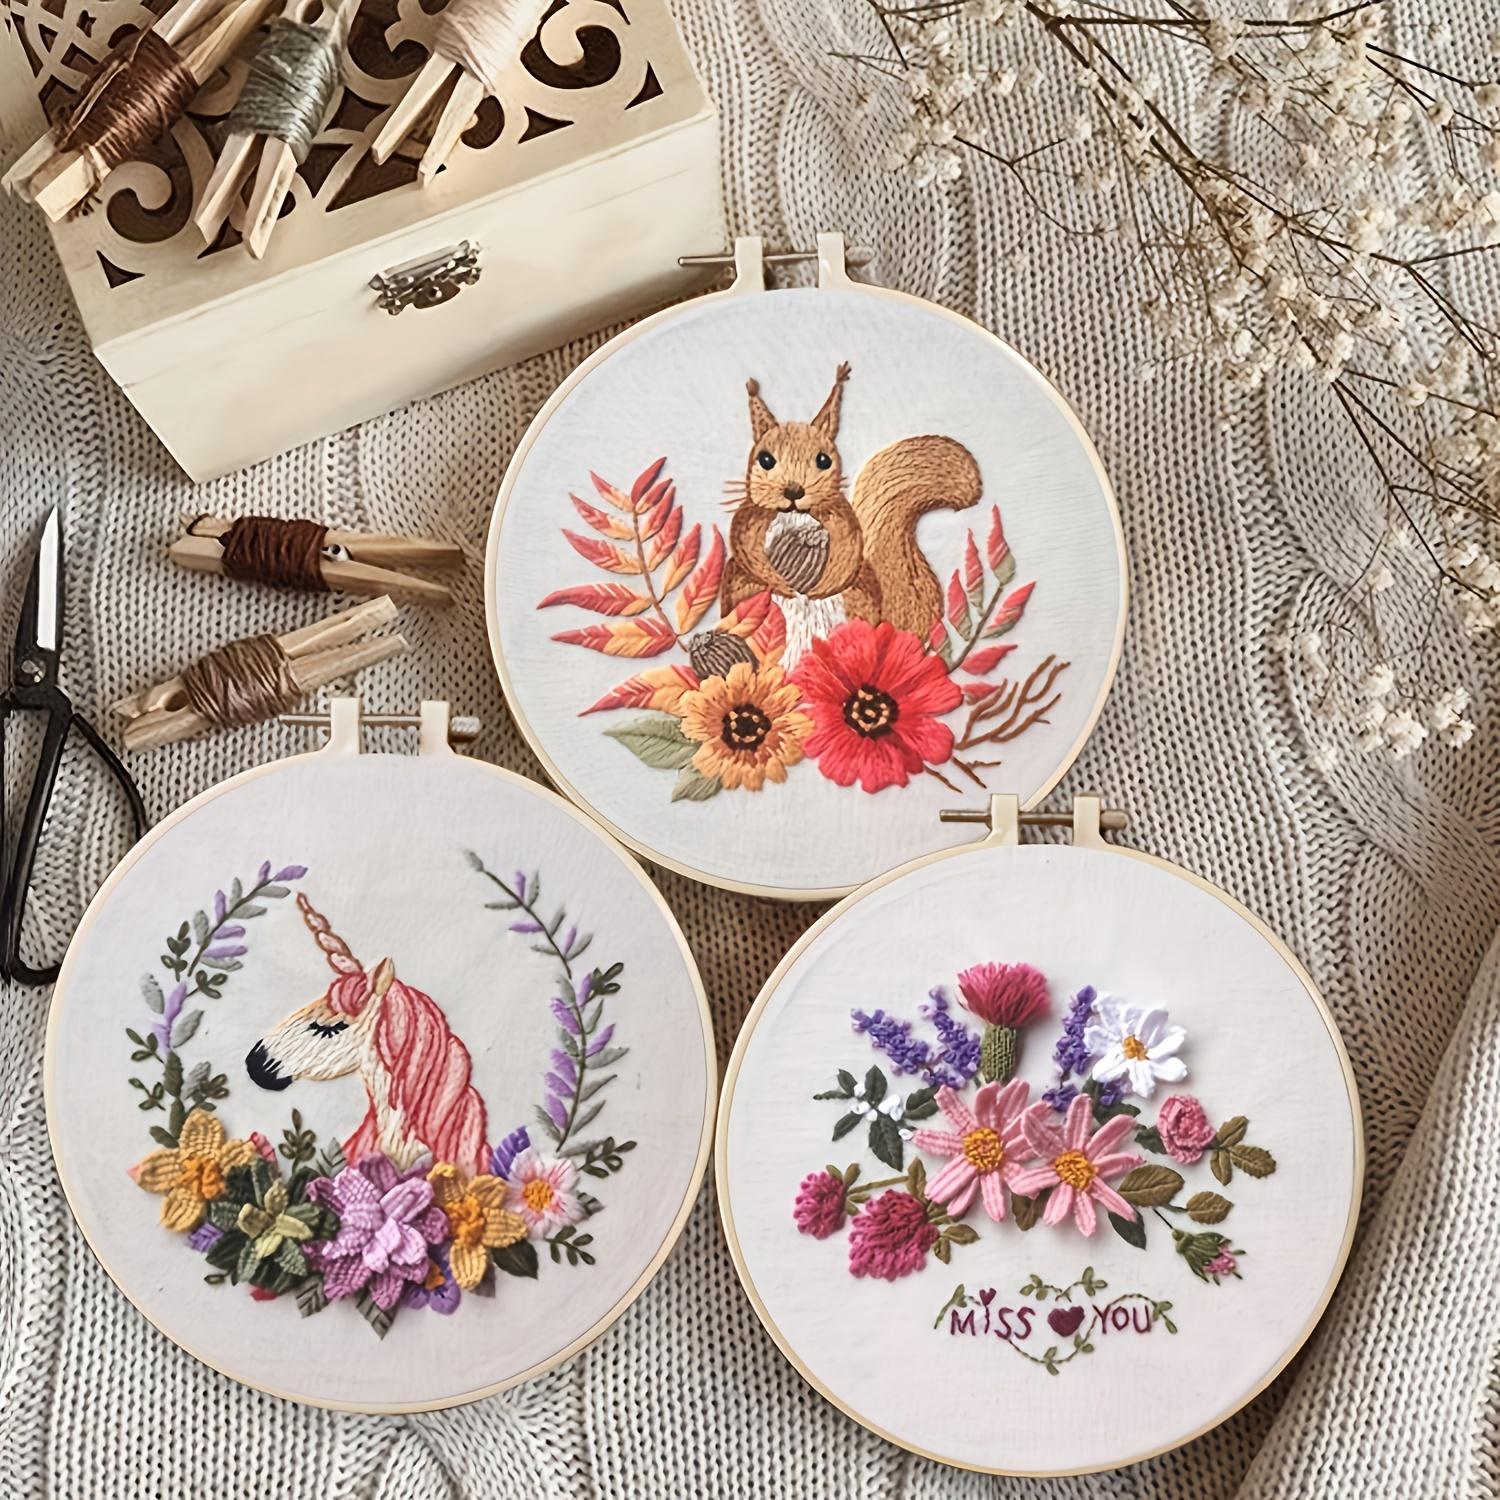 

Animal Unicorn Embroidery Diy Flowers Painting Full Needlework Cross Stitch Kits Embroidery Sewing Kit For Beginners Gift For Mother's Day